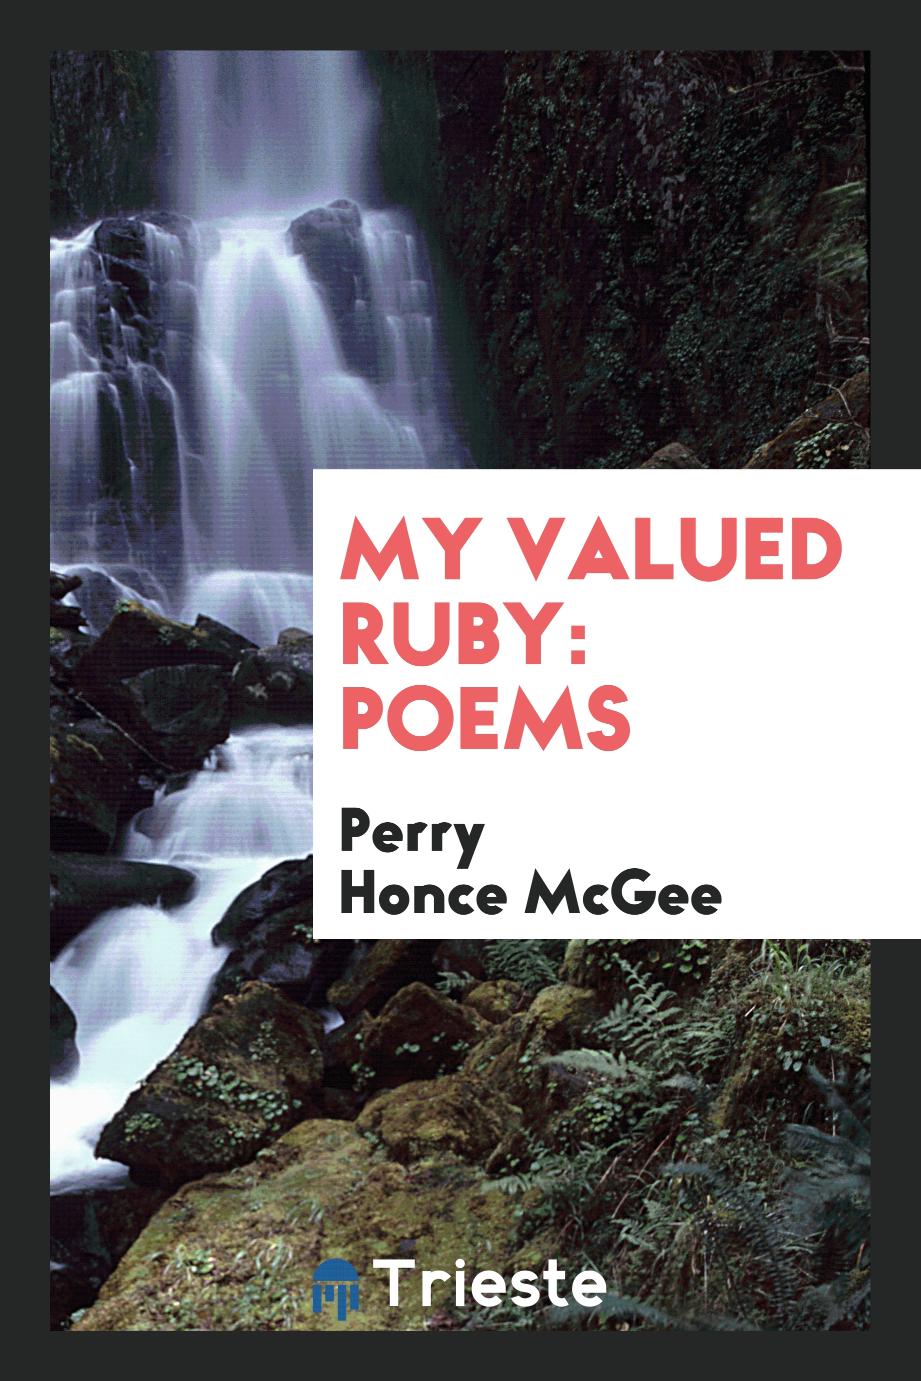 My Valued Ruby: Poems